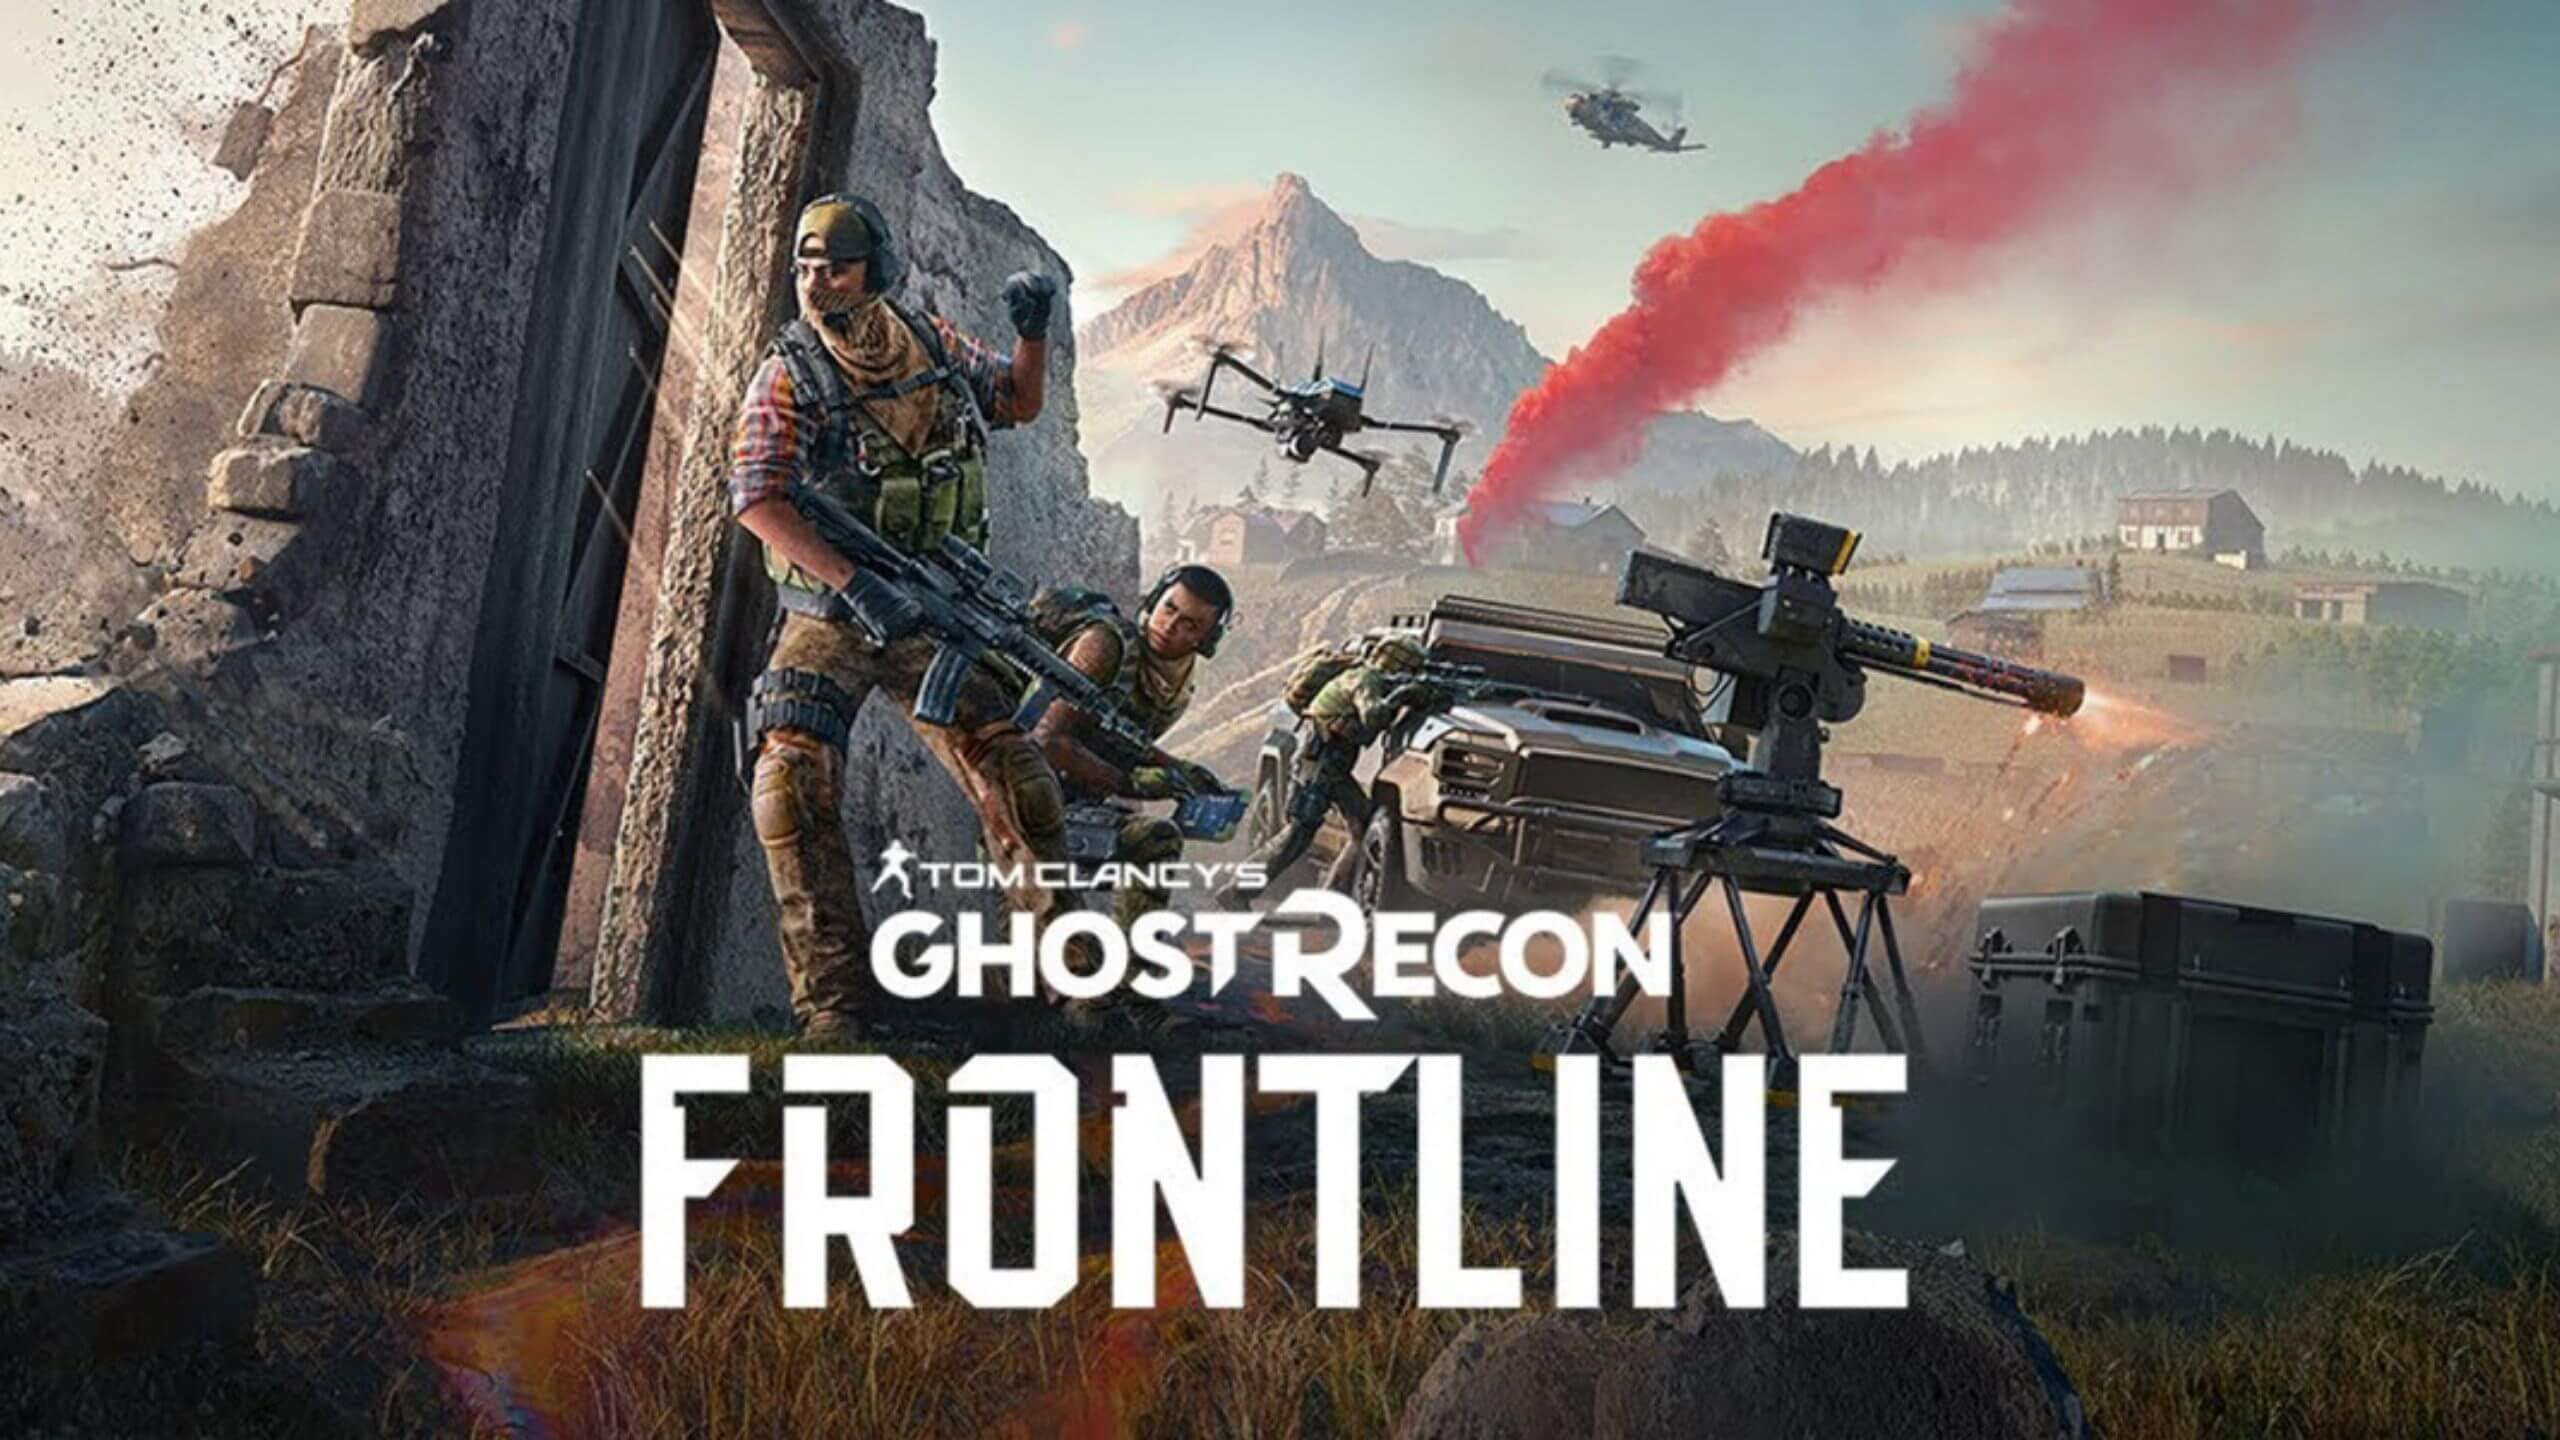 Ghost Recon Frontline Closed Test